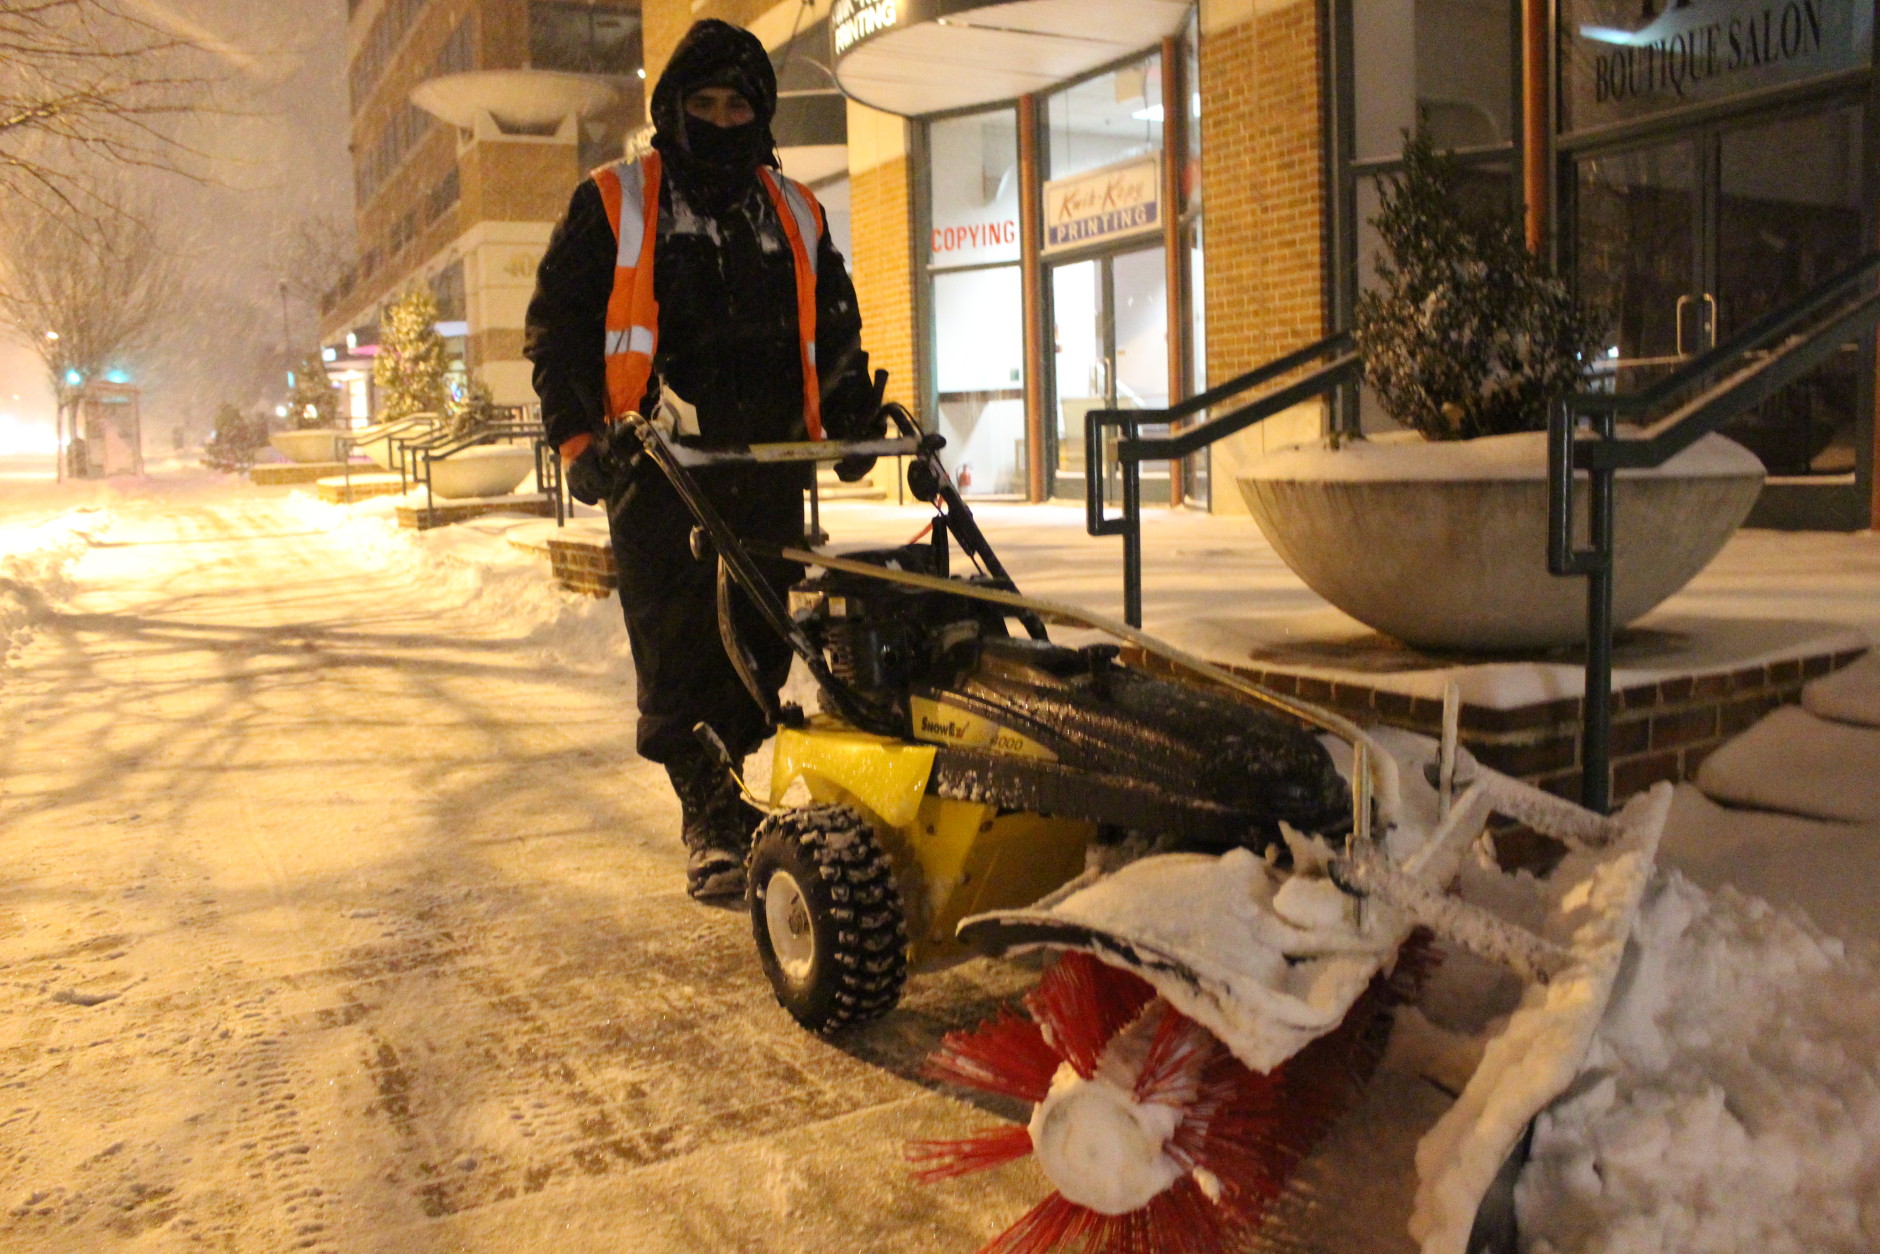 As the snow fell, removal crews worked to clear sidewalks and street corners. (WTOP/Dana Gooley)